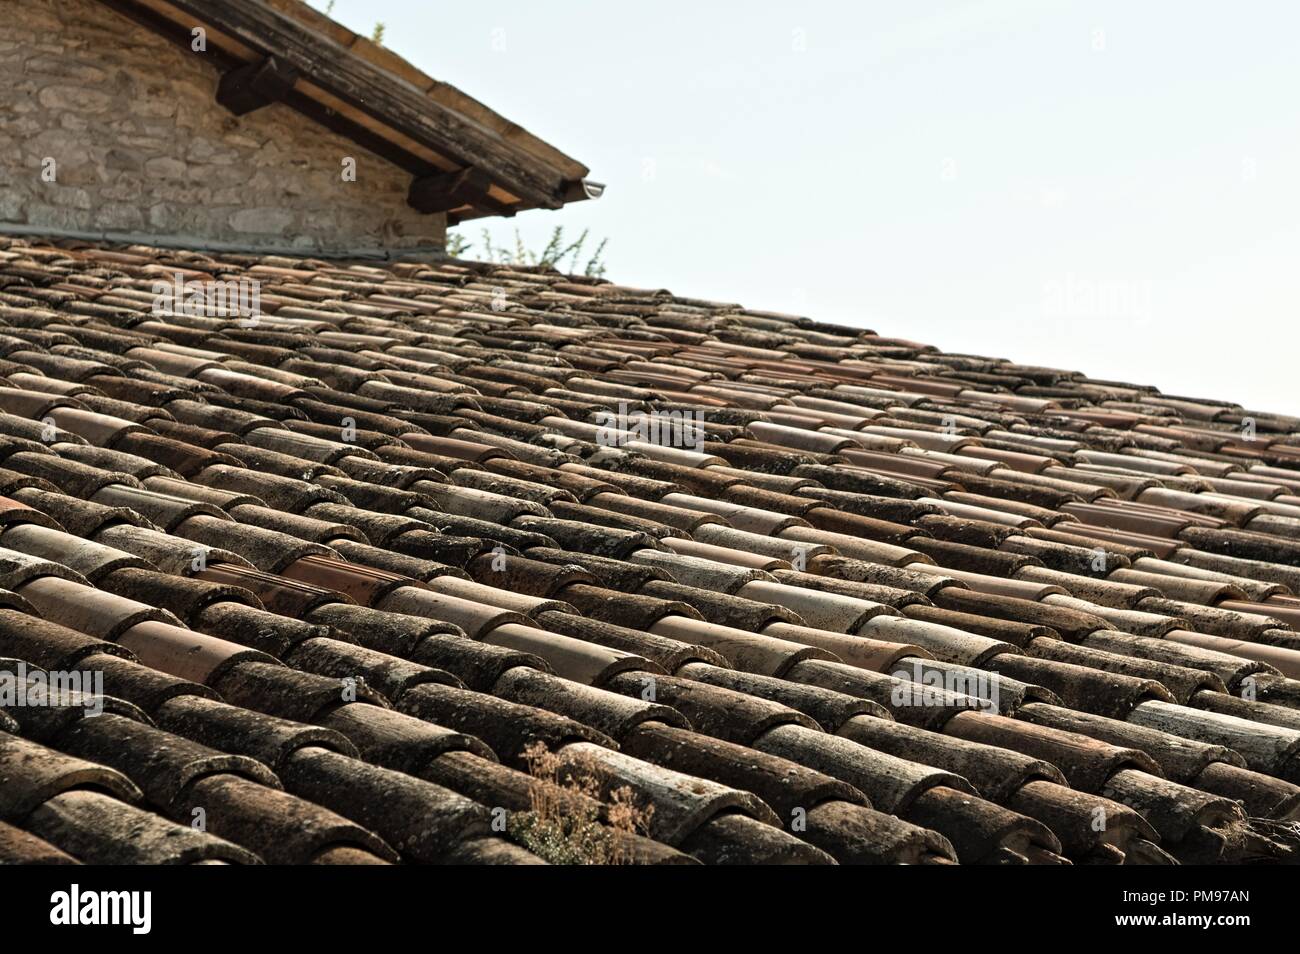 Ceramic Tiles Italy High Resolution Stock Photography And Images Alamy